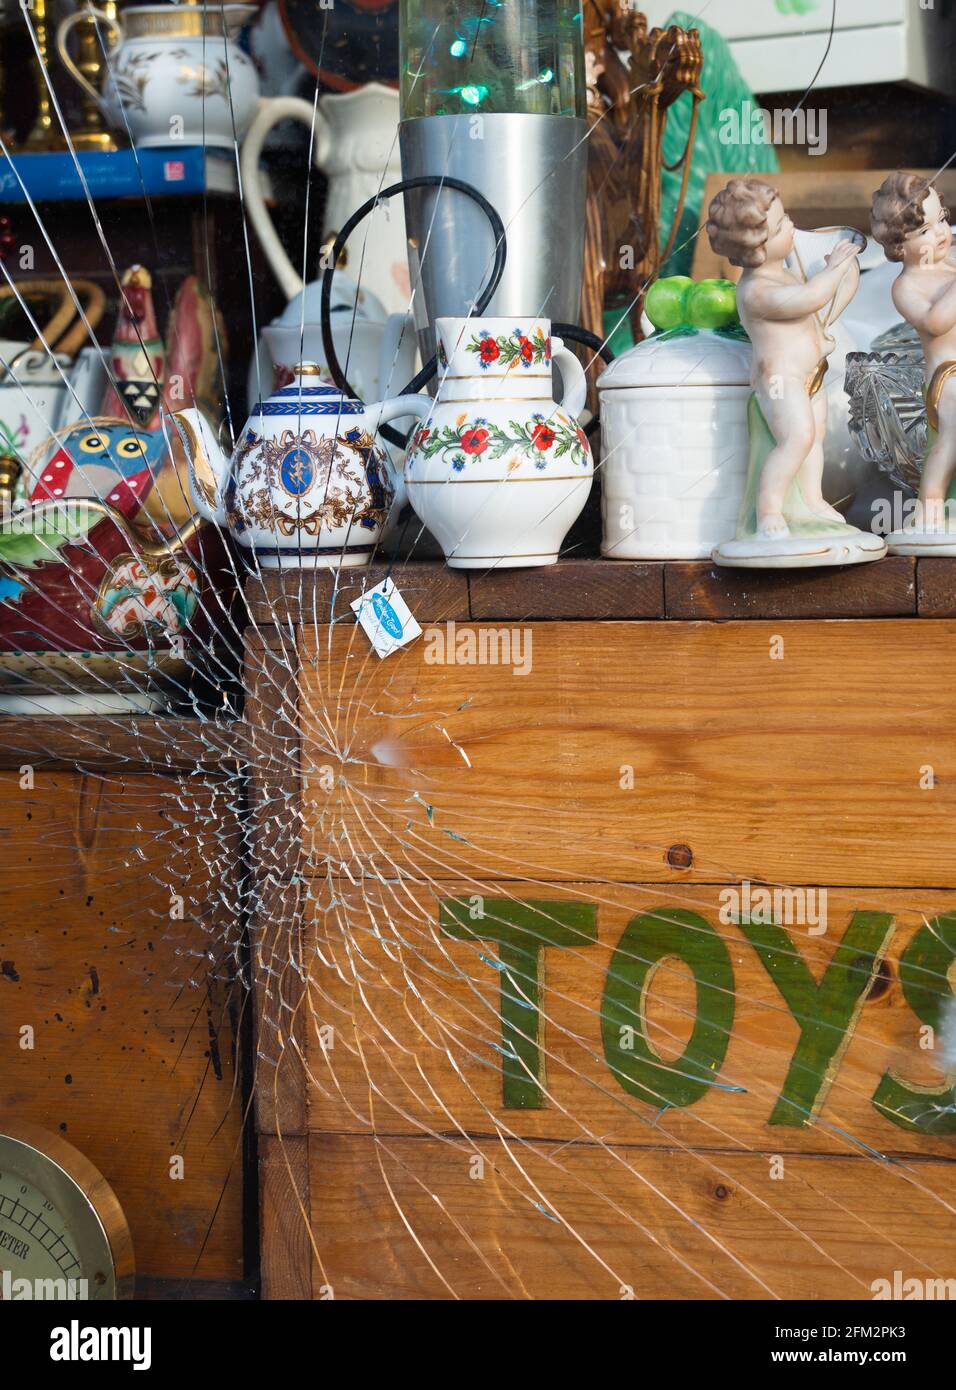 Broken, shop window, safety glass, laminated, shatter proof, smash and grab, toys, antiques, collectables, knickknacks, toys, ornaments, tea pot. Stock Photo